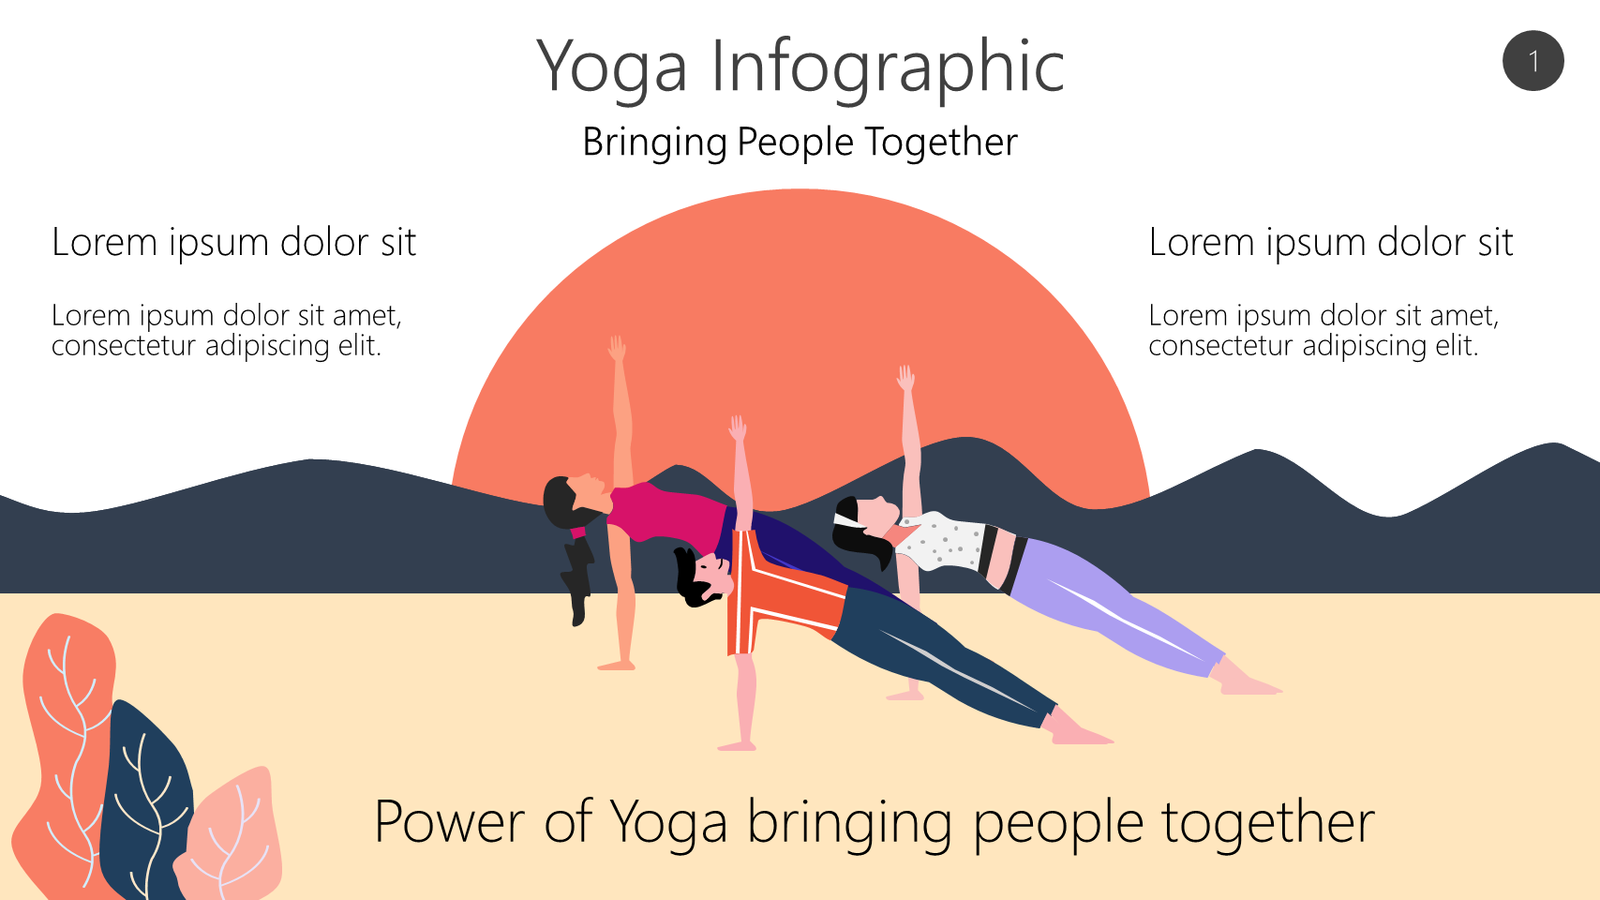 PPT – Surya Namaskar Instructions - Step-by-Step Guide to 12 Poses  PowerPoint presentation | free to download - id: 97508c-MGU1Z